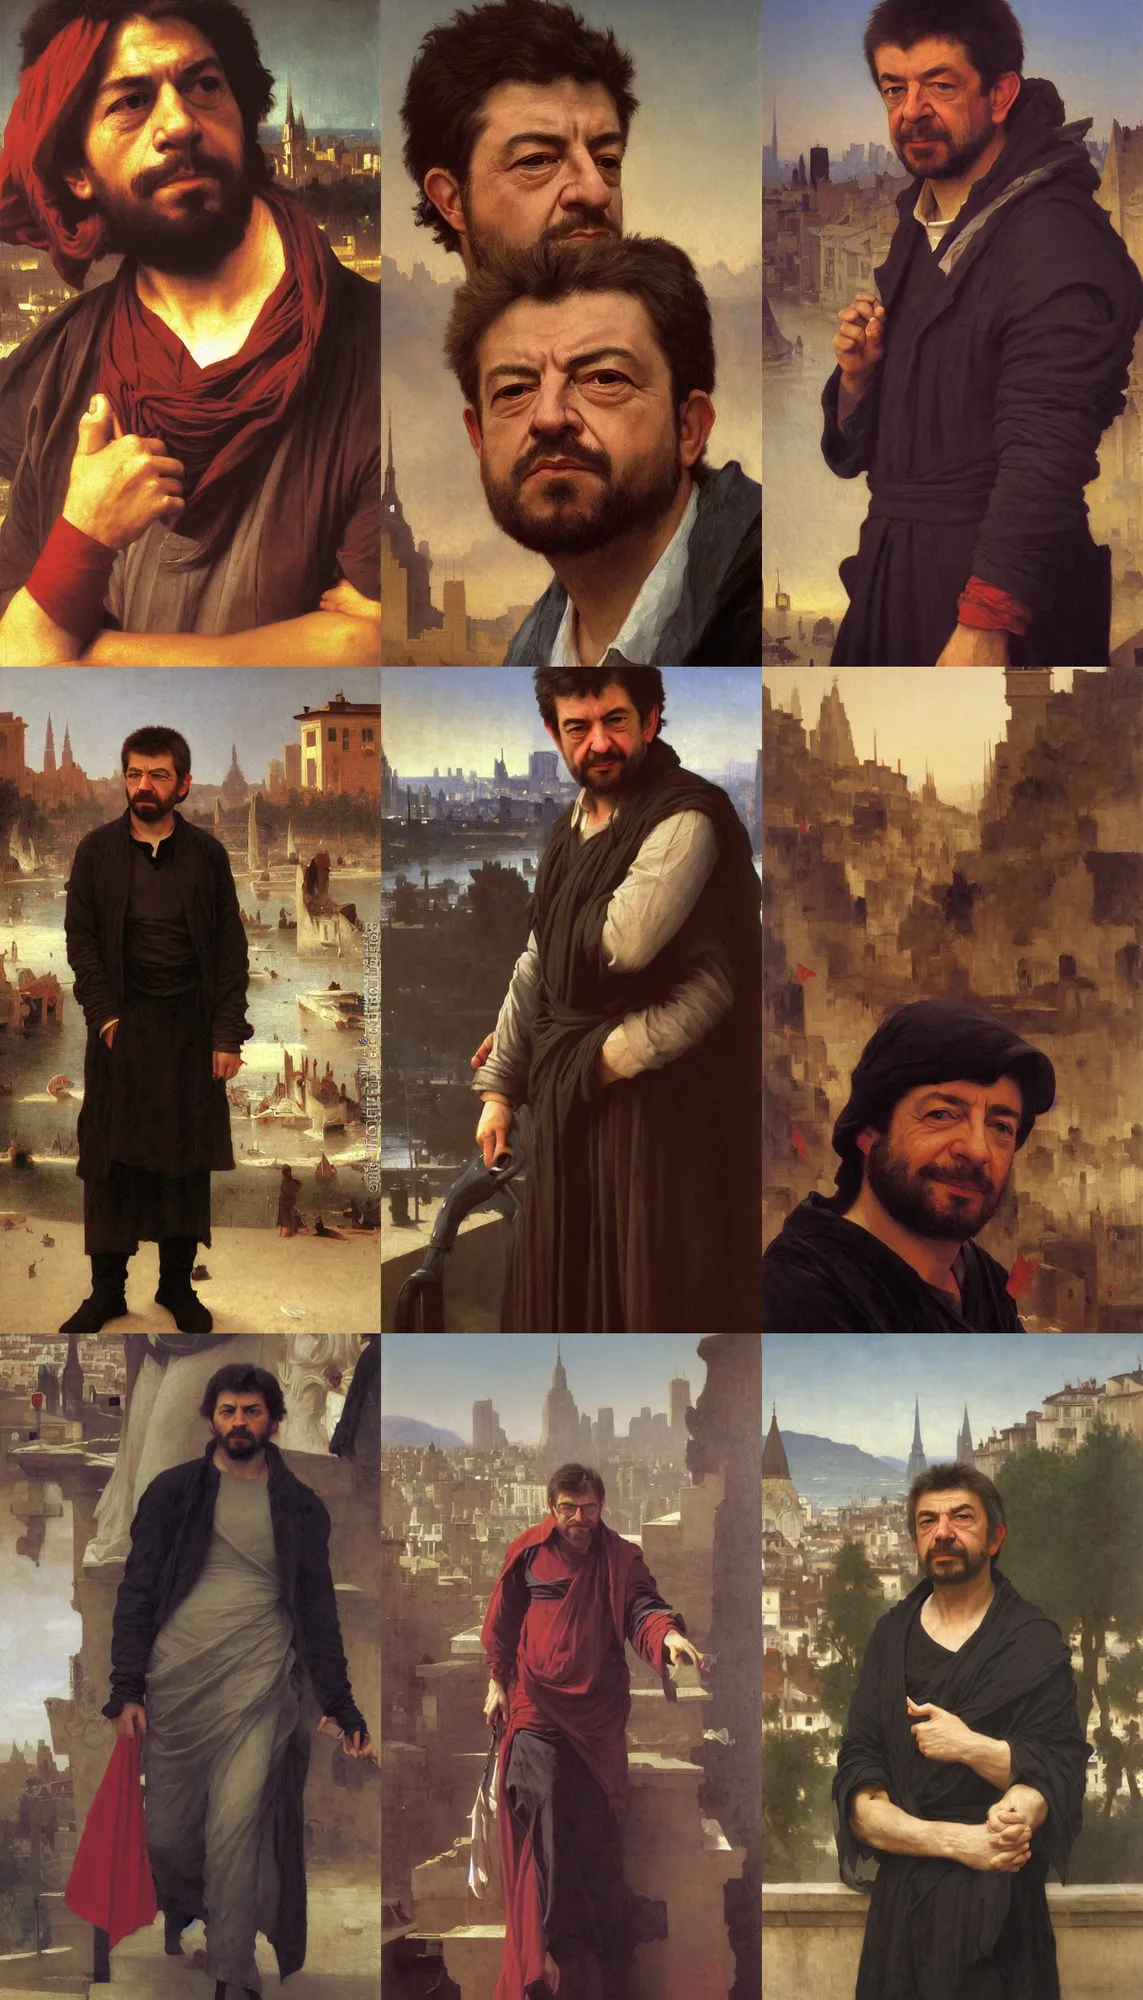 Prompt: portrait of jean - luc melenchon, detailed painting, city background, epic scene, epic lighting, by bouguereau